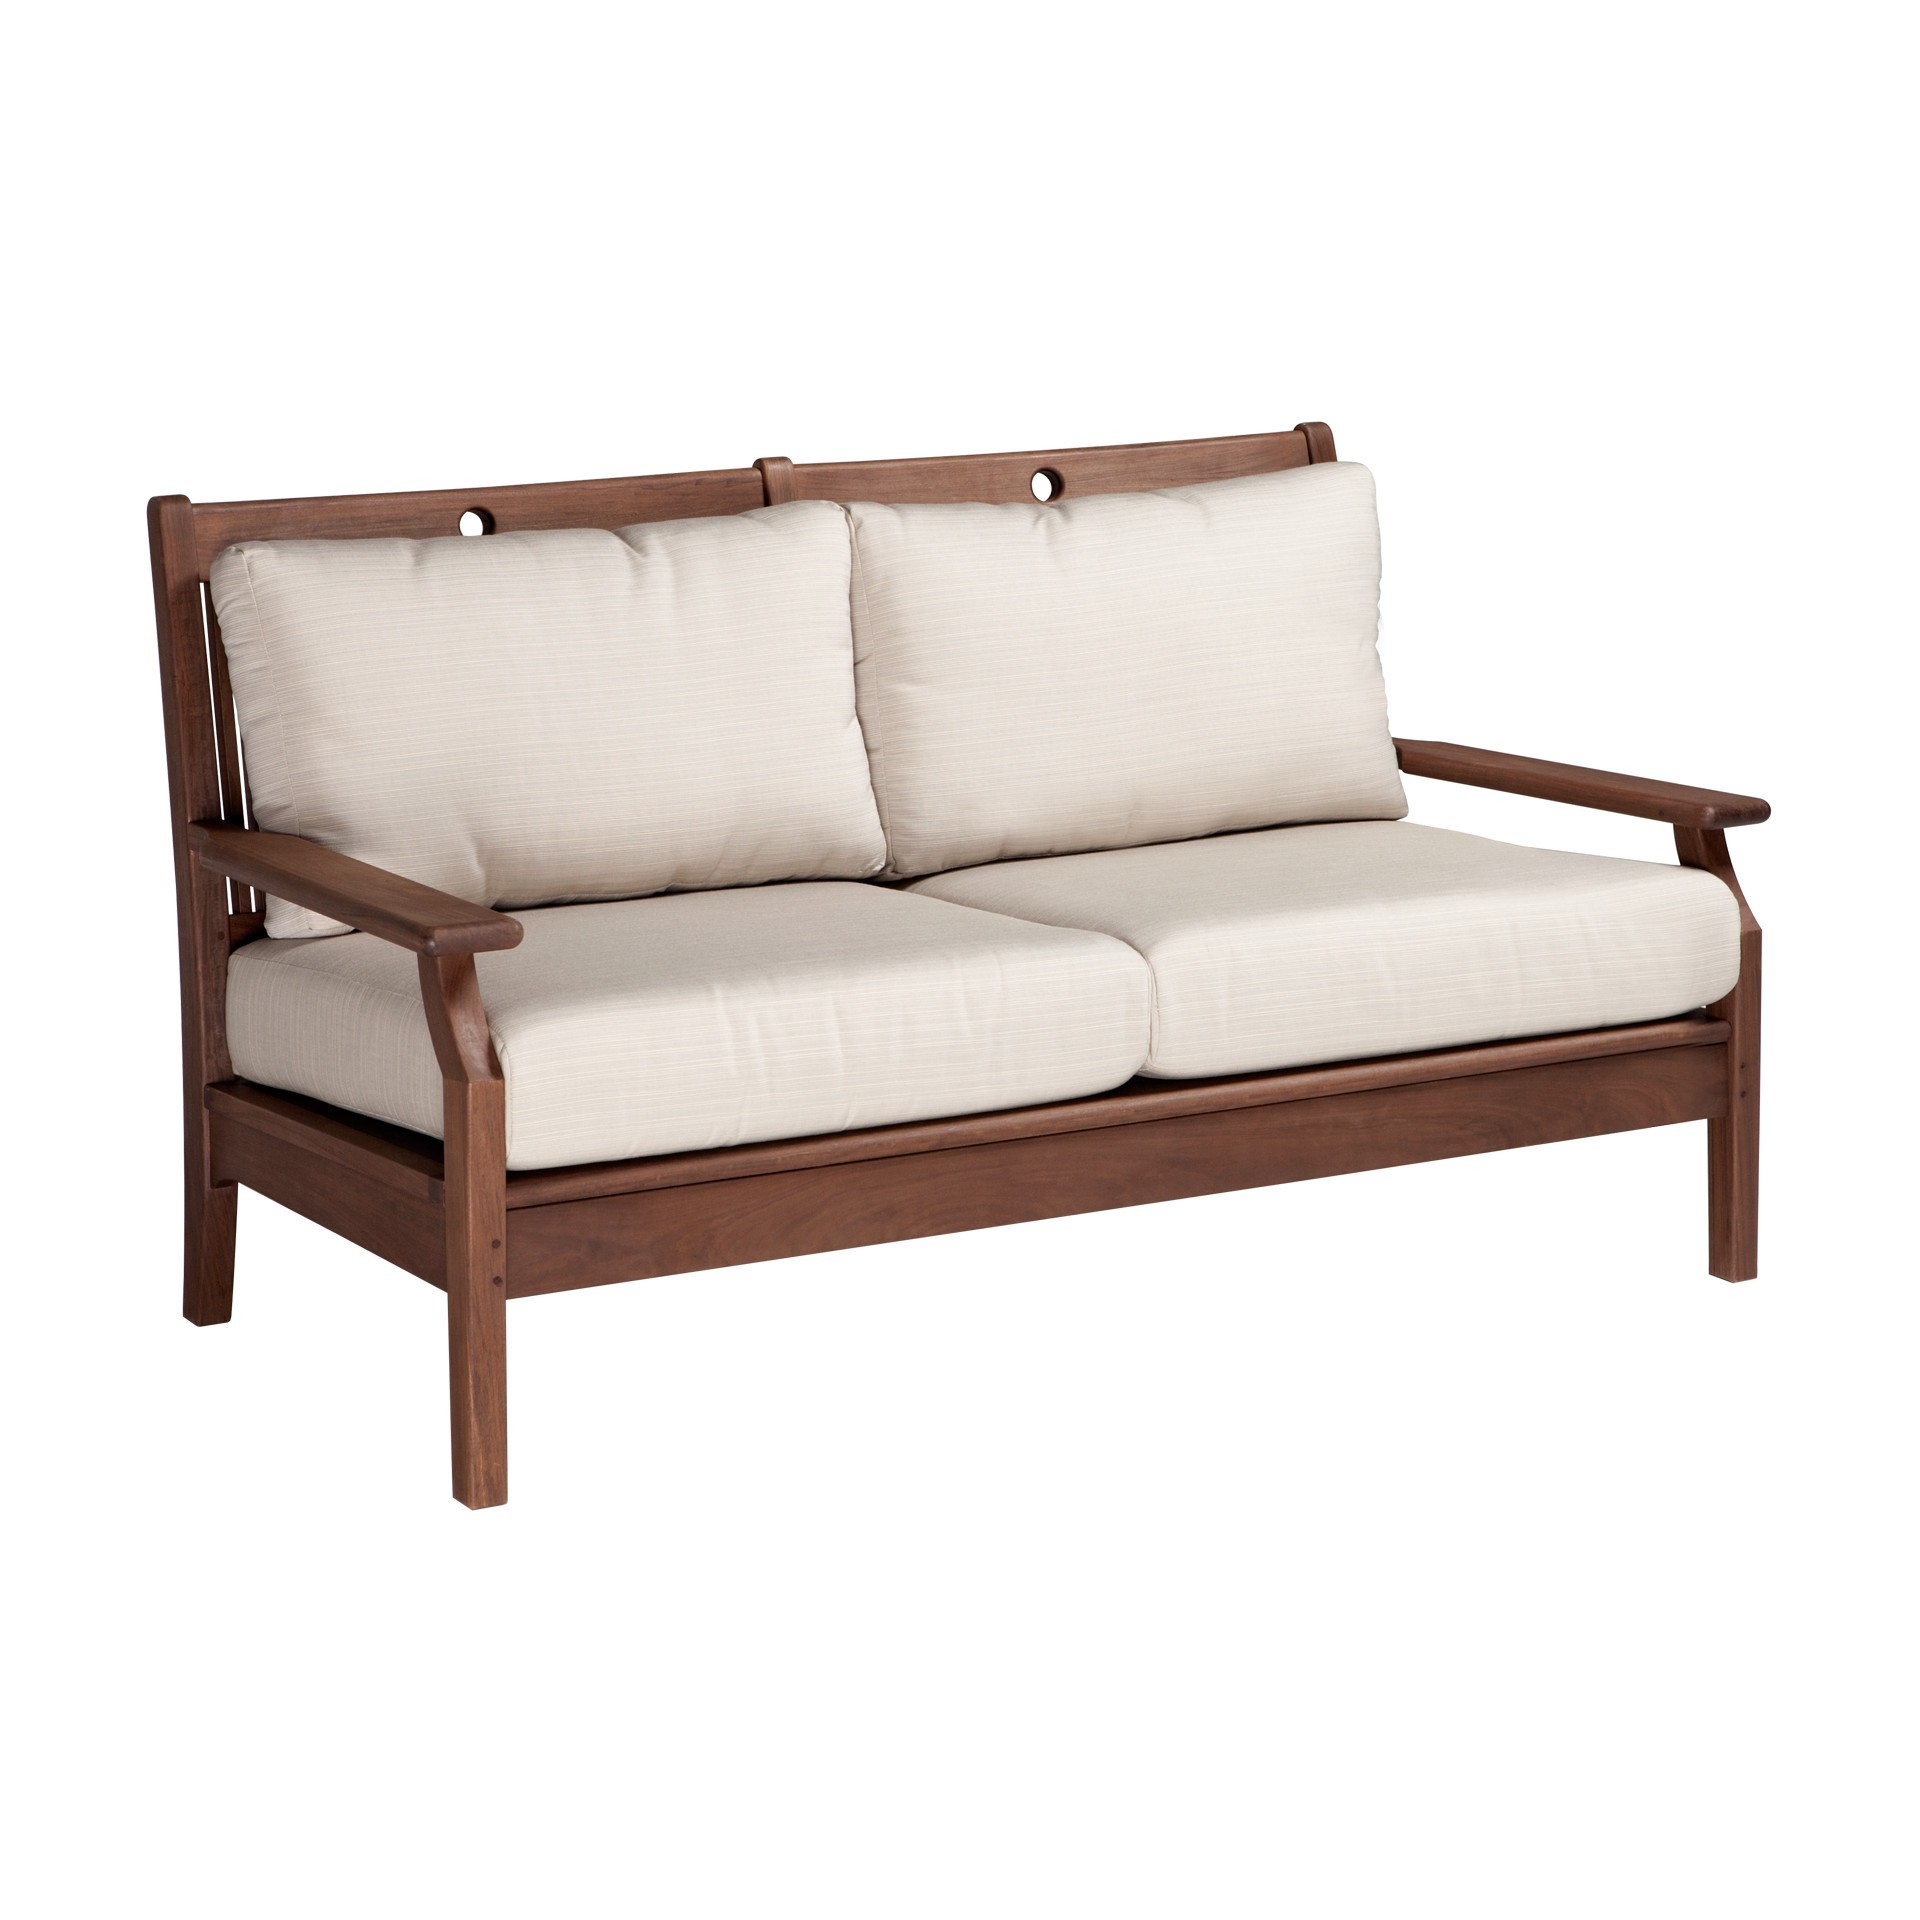 Opal loveseat from Hausers Patio Hausers Patio